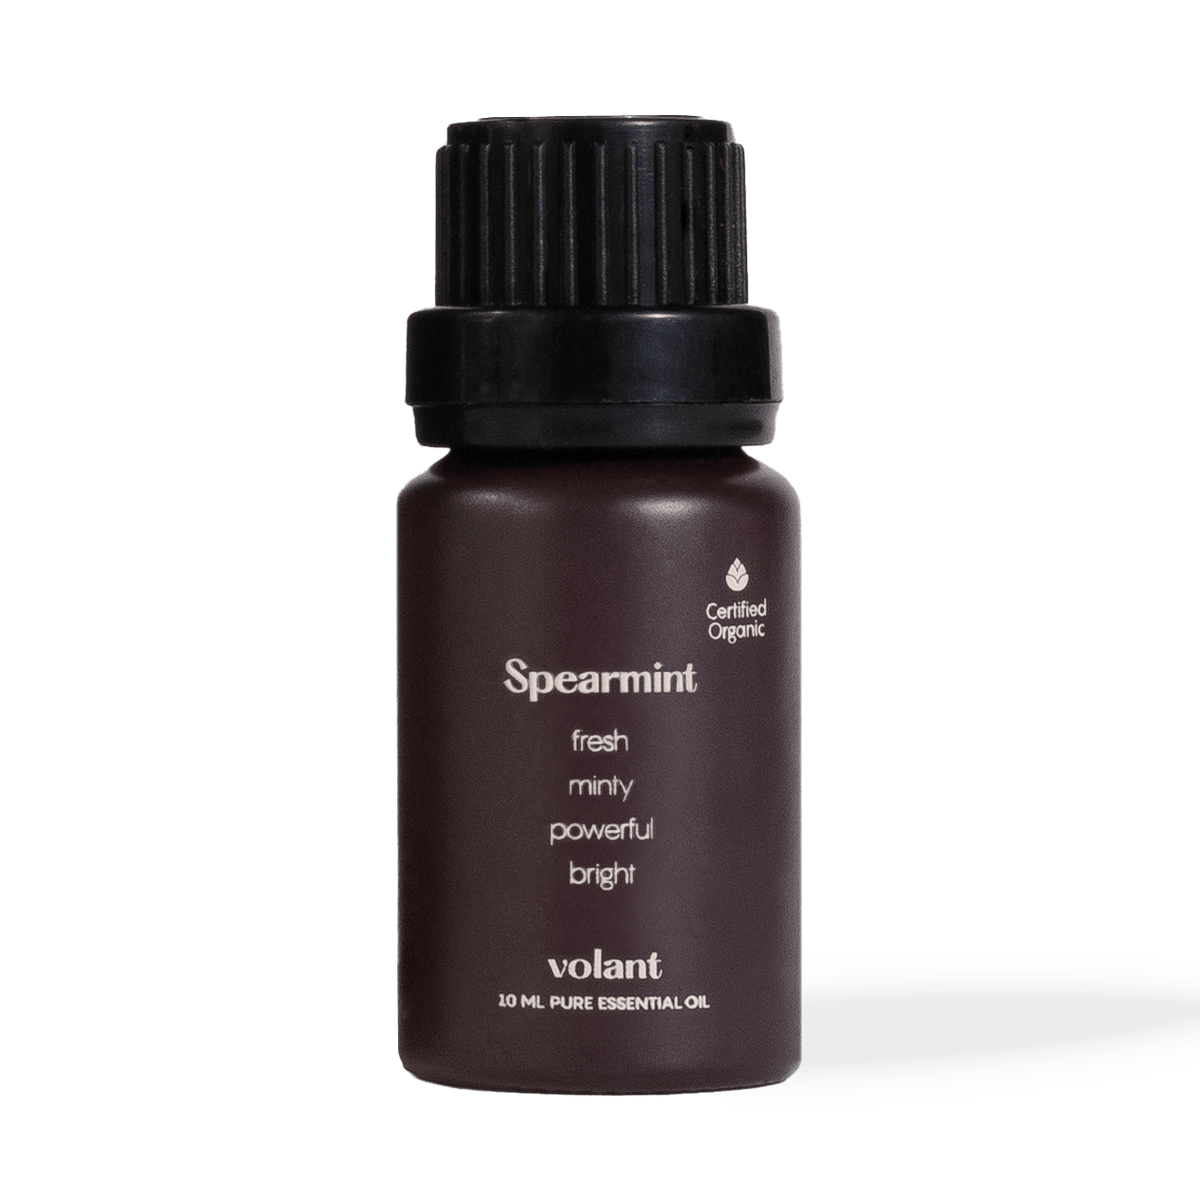 volant organic spearmint essential oil soothe ailments such as skin problems, headaches, nausea, vomiting, respiratory issues, and cold symptoms